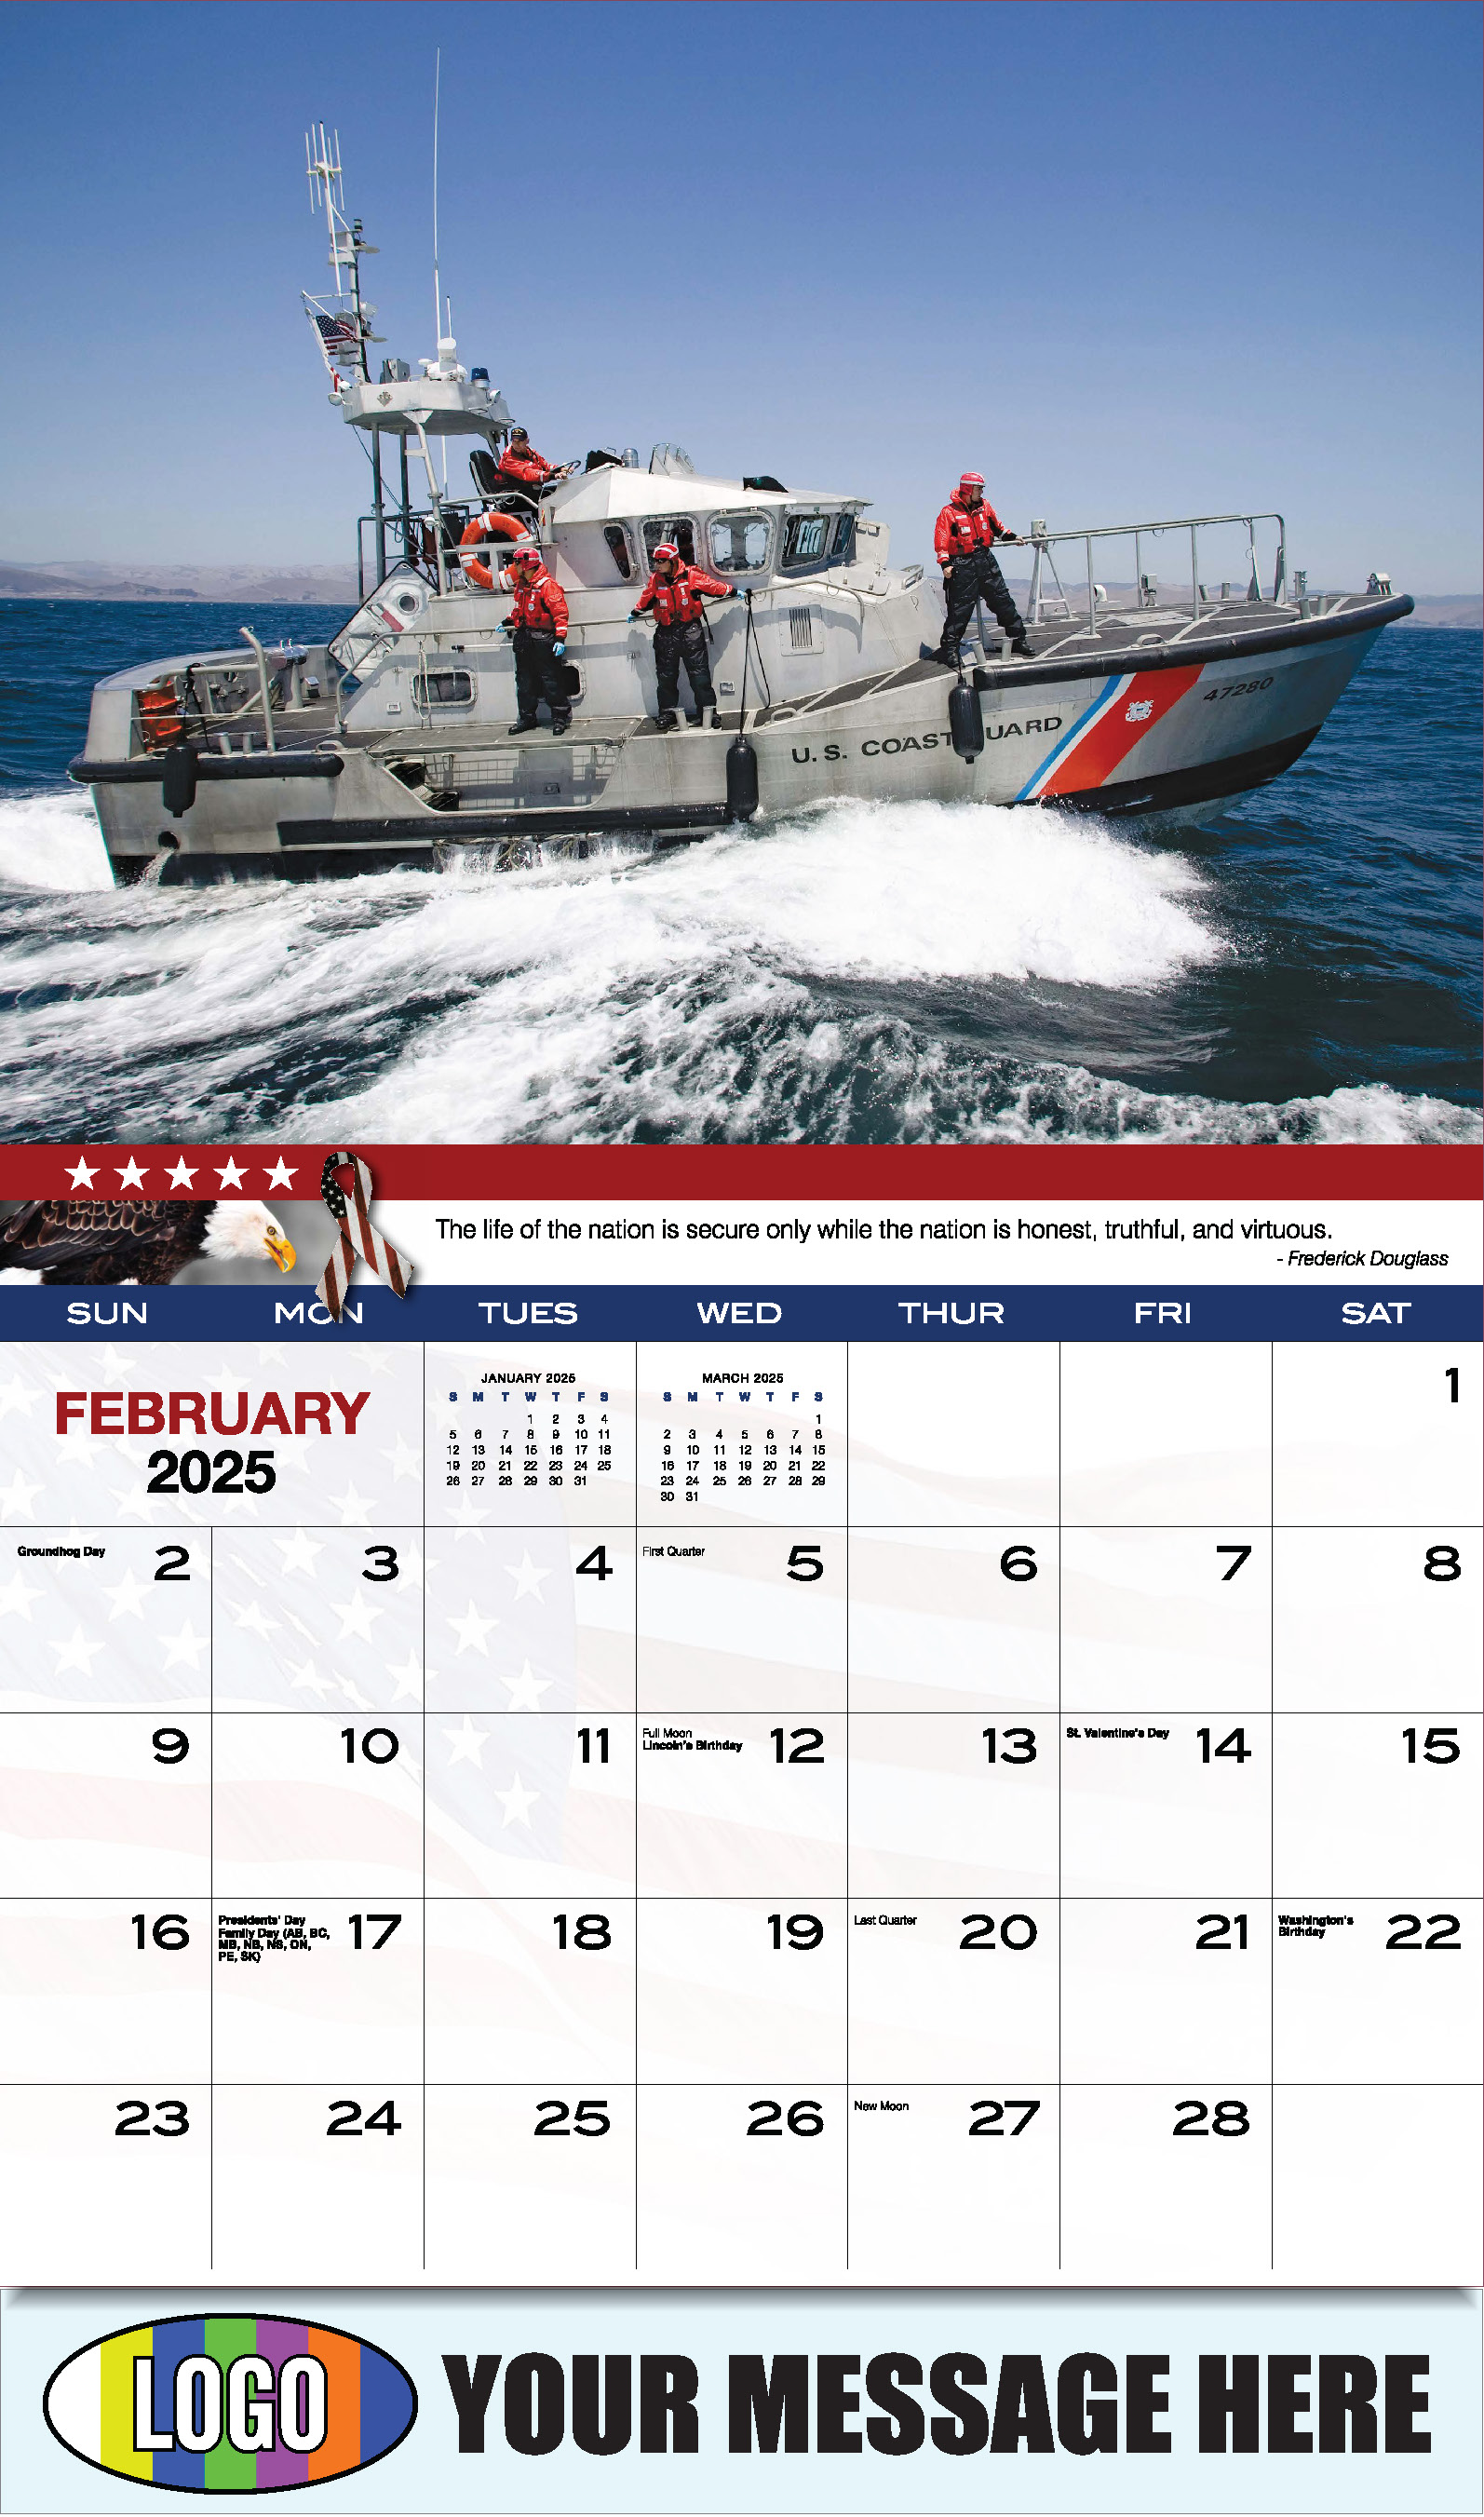 Home of the Brave 2025 USA Armed Forces Business Promo Calendar - February